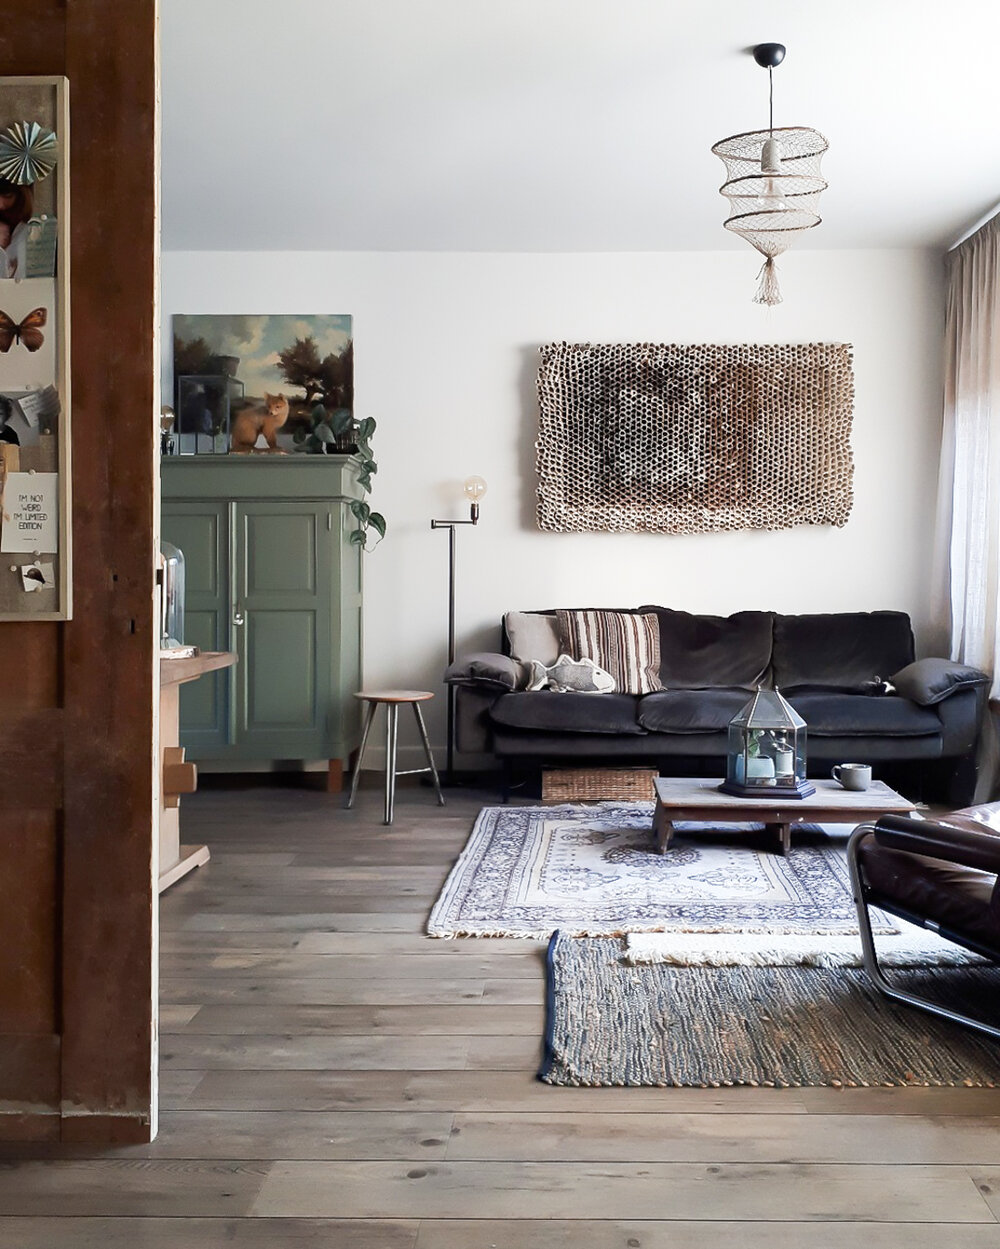 Tour This Relaxing, Soulful Home in The Netherlands